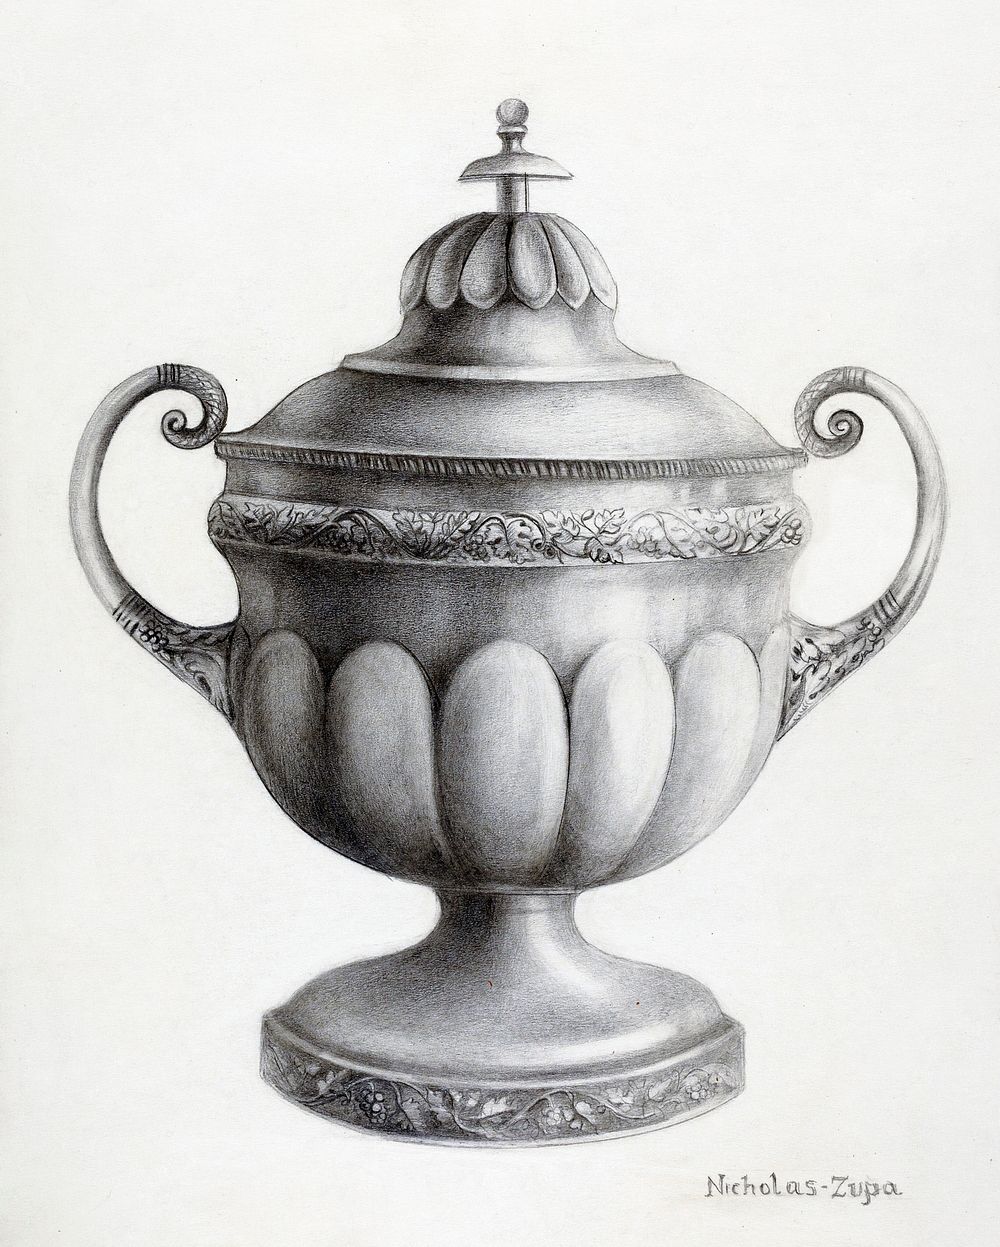 Silver Sugar Bowl (ca.1936) by Nicholas Zupa. Original from The National Gallery of Art. Digitally enhanced by rawpixel.